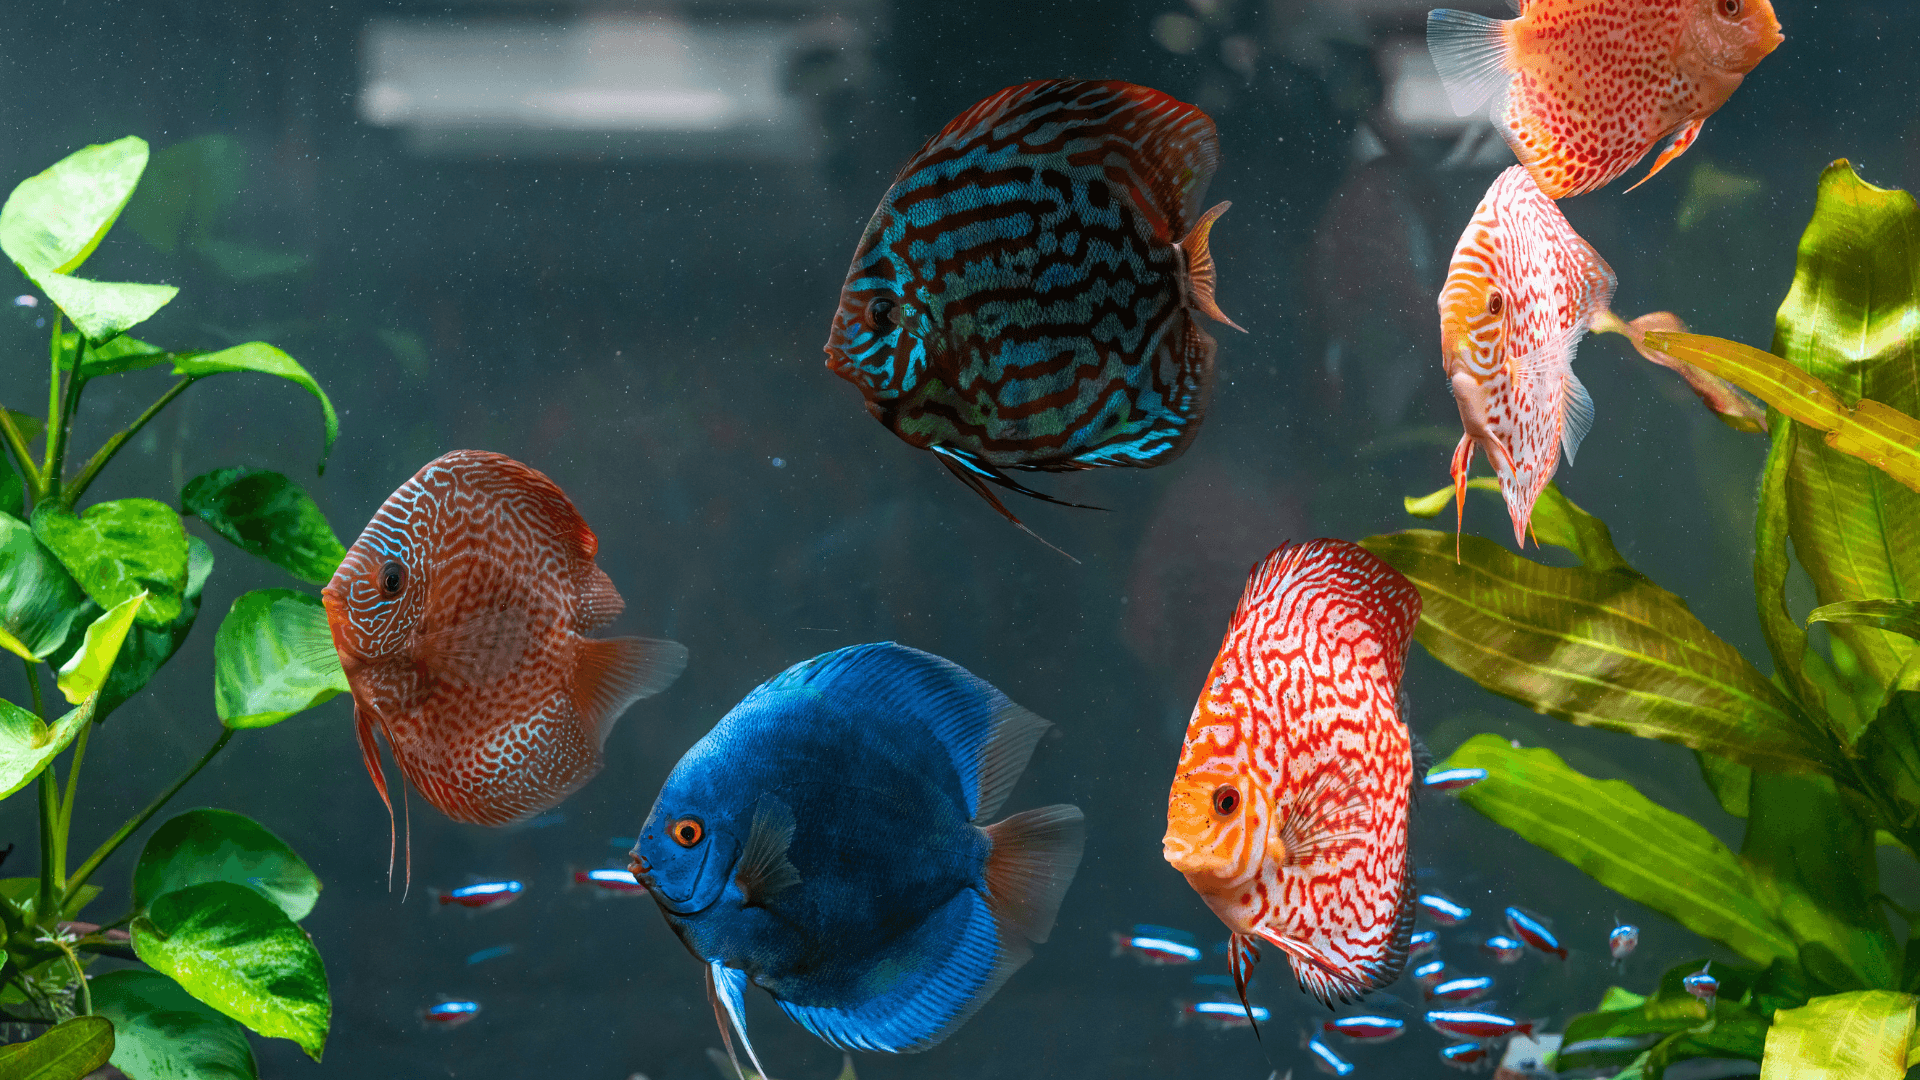 A photo of Common discus